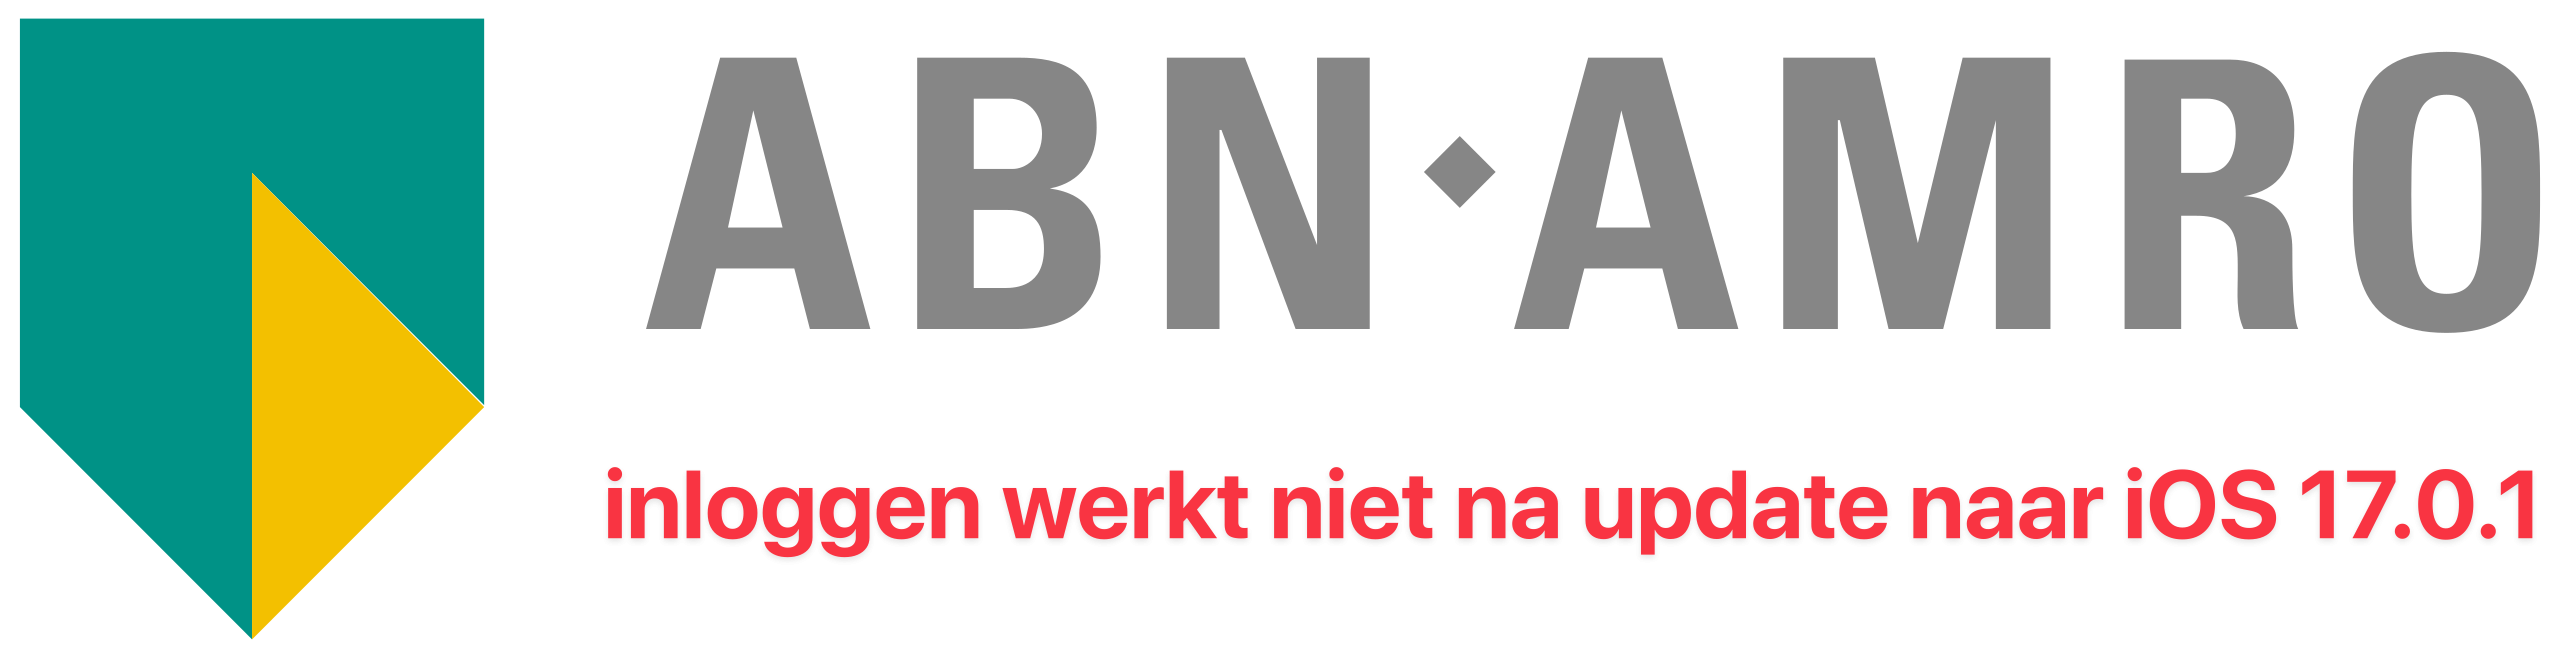 ABN-AMRO_Logo_new_colors.png